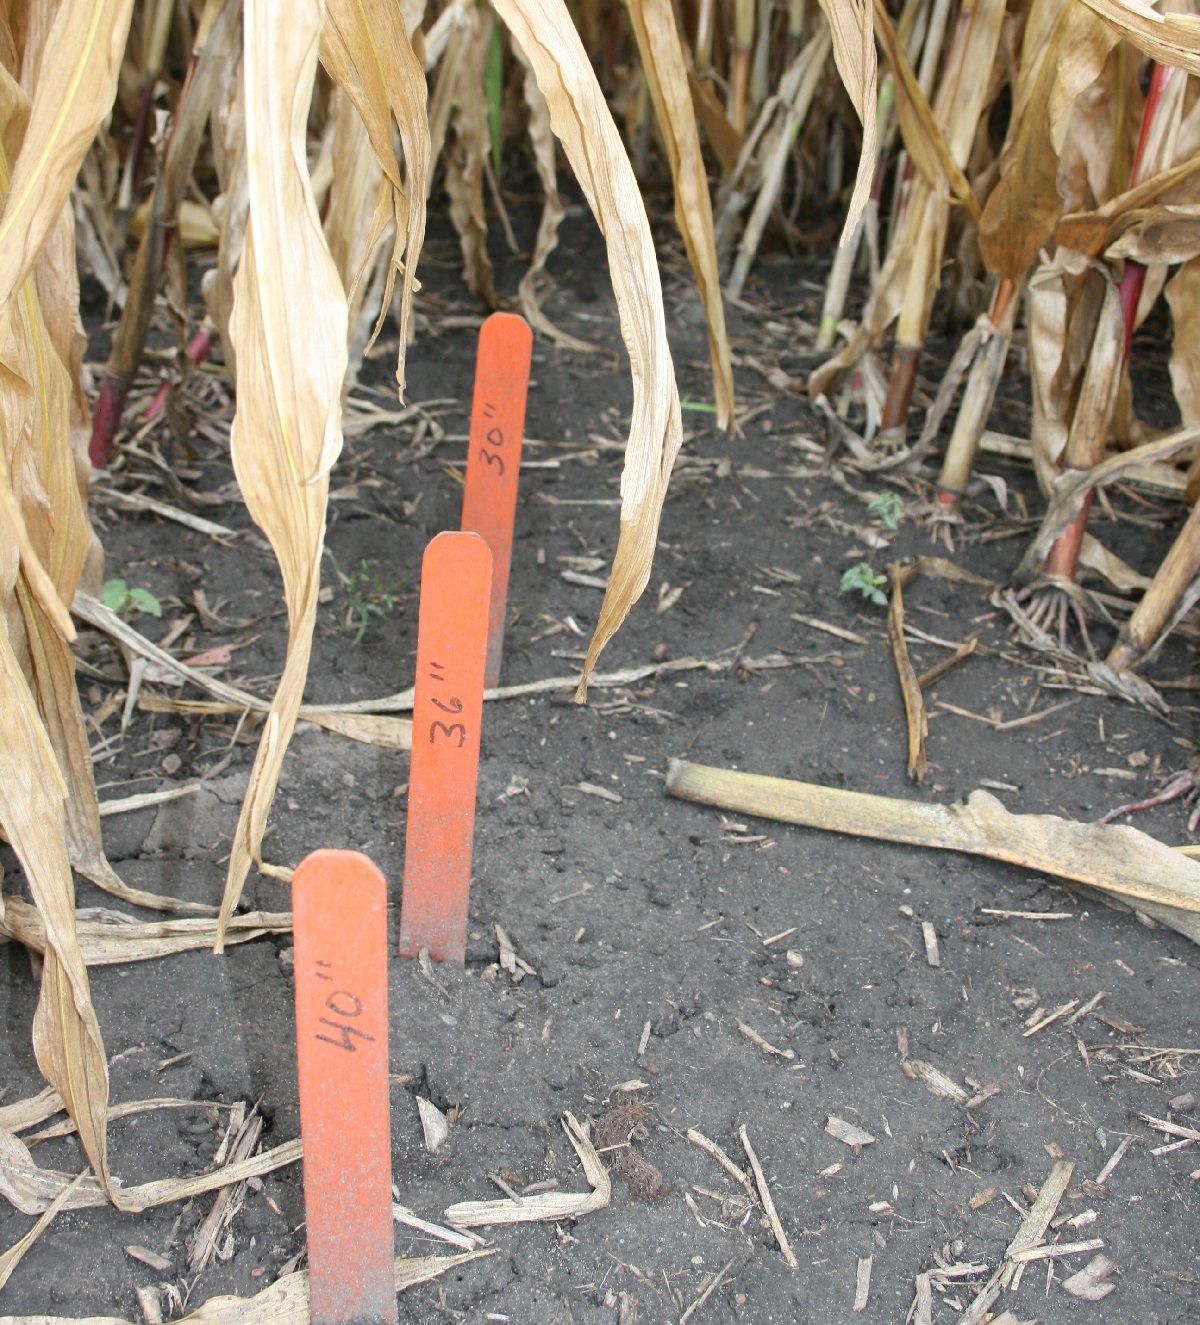 This agronomic image demonstrates different corn row spacing at the Syngenta Grow More™ Experience site in Stanton, MN.